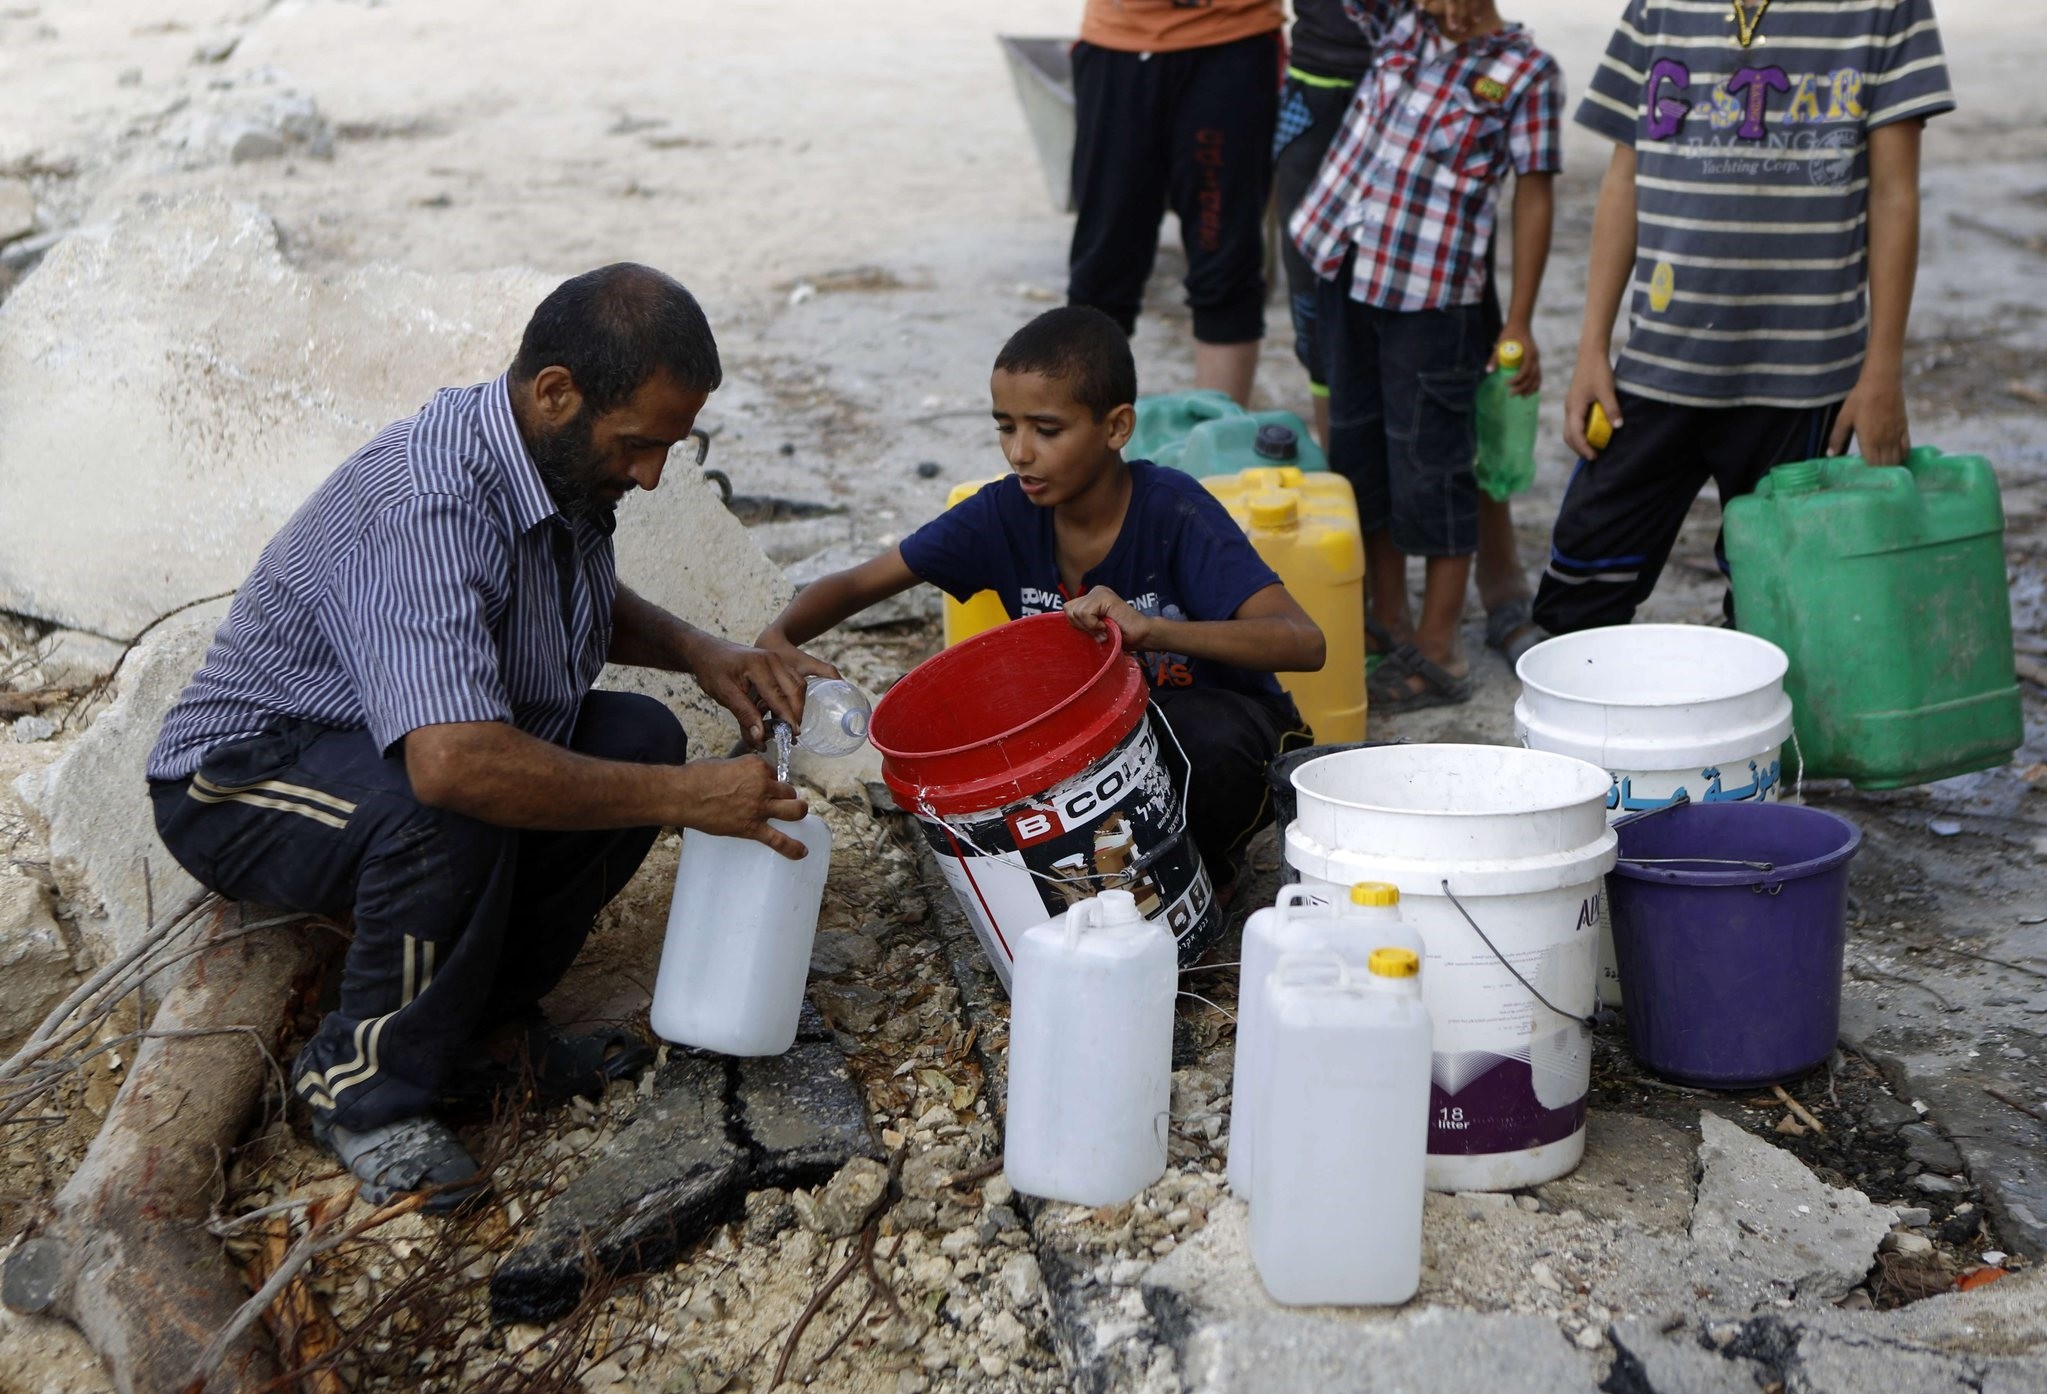 A Palestinian man and children fill containers with water from a broken main in Gaza City's al-Shejaea neighborhood on August 6, 2014 (AFP Photo)